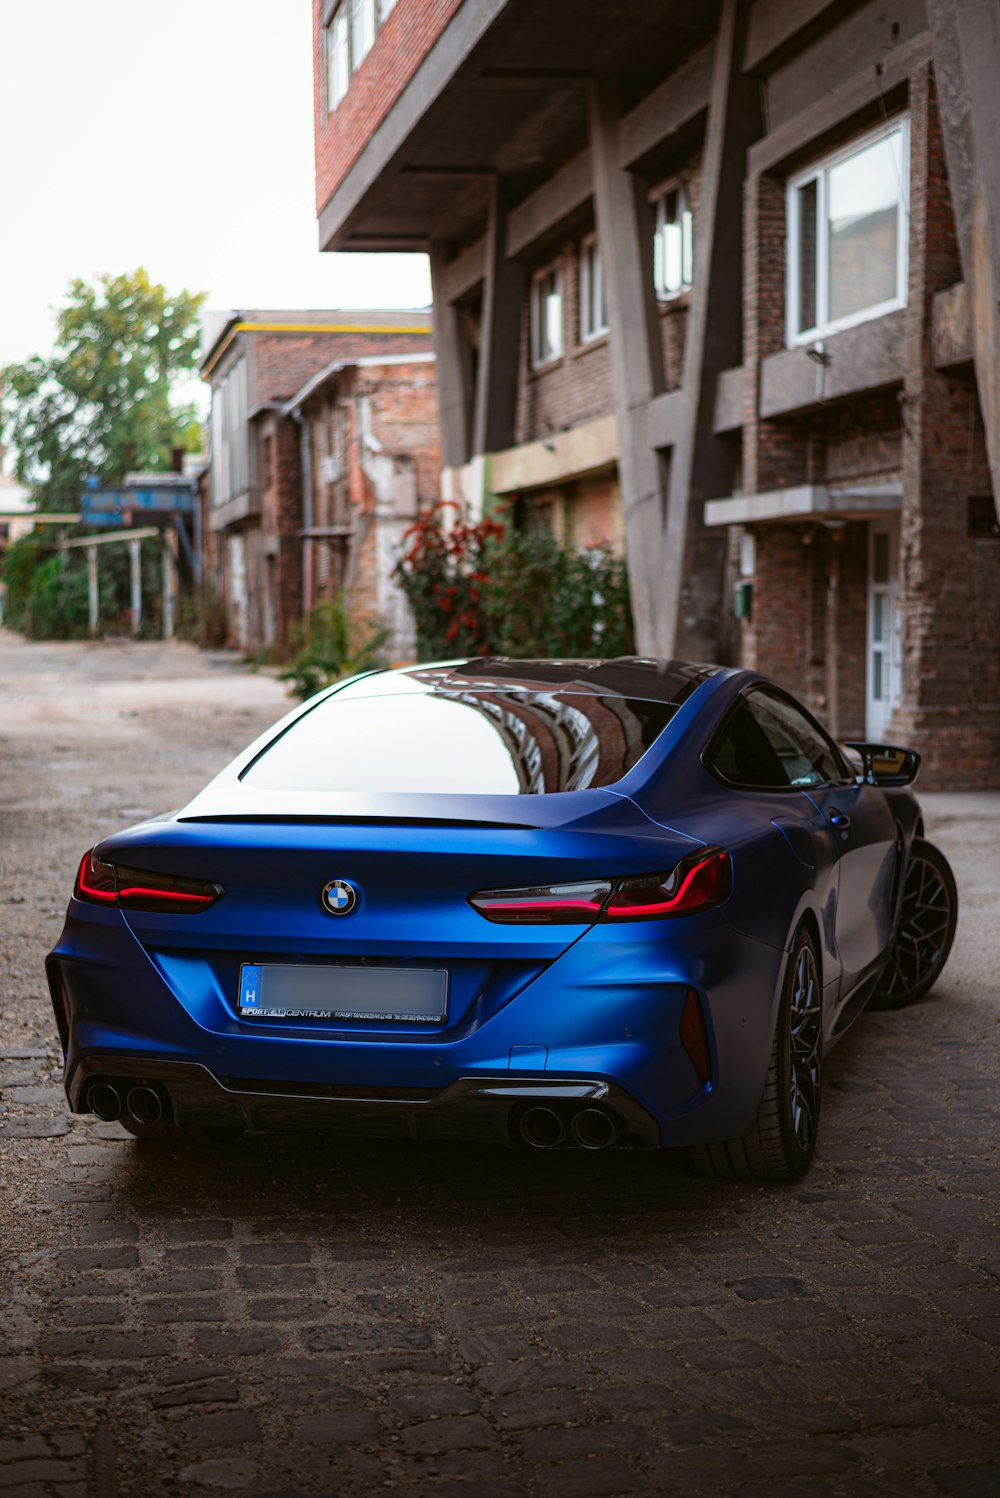 a blue sports car parked in front of a brick building